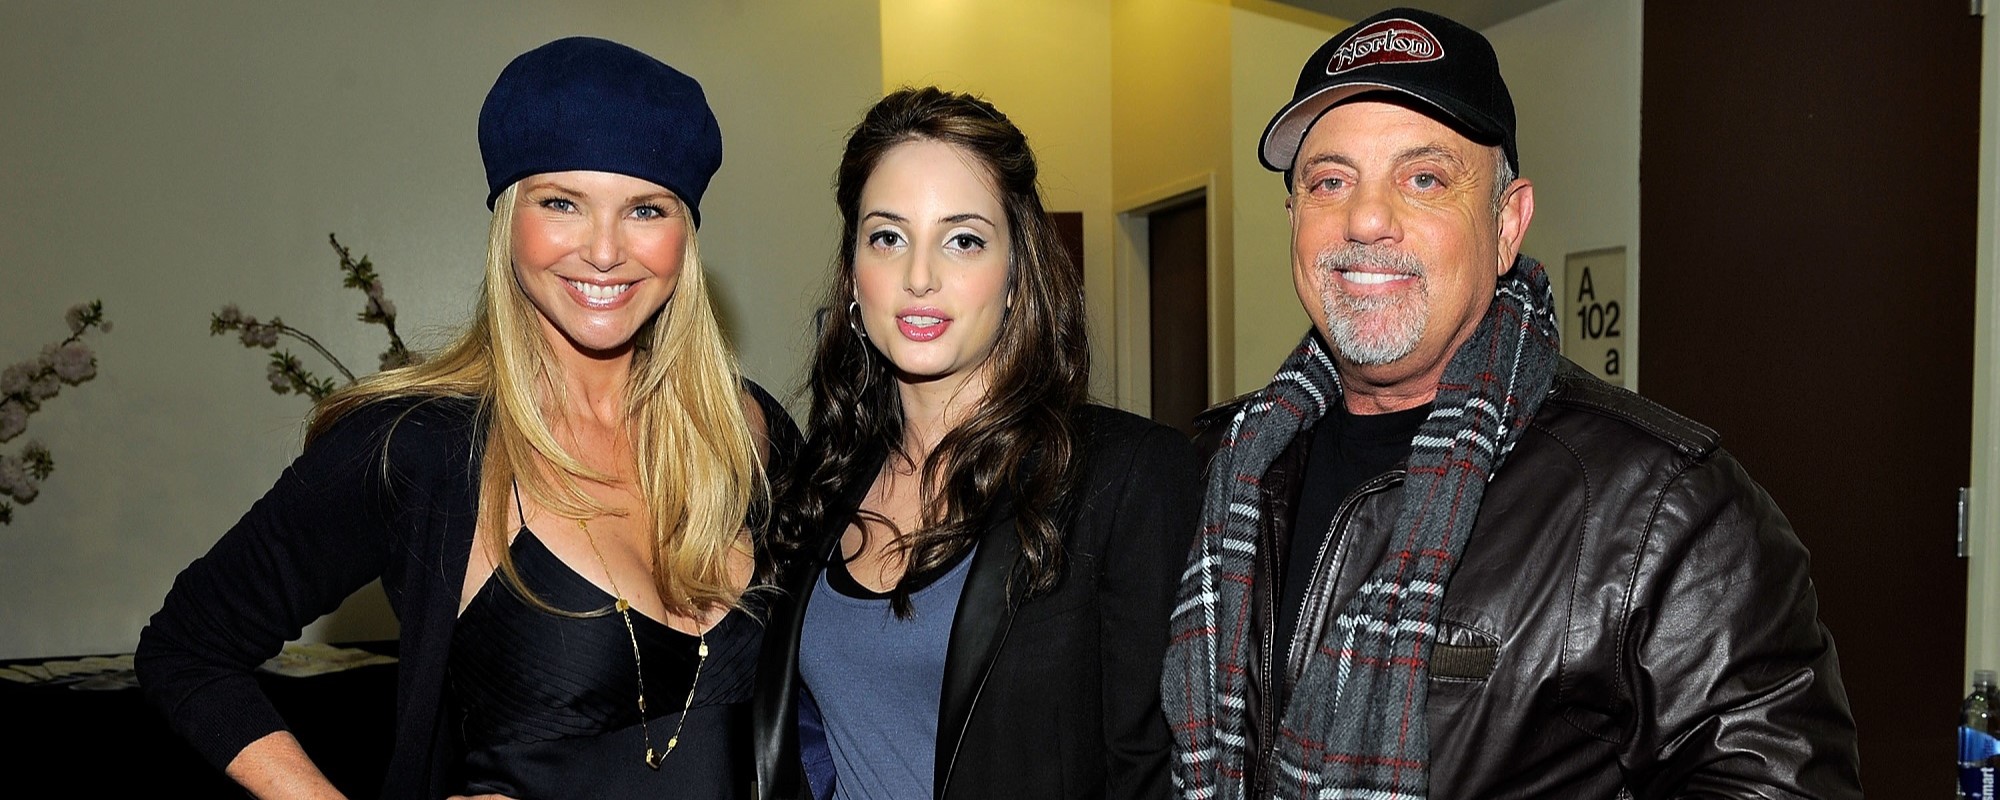 Watch Billy Joel’s Ex-Wife Proudly Take in Their Daughter’s Stunning MSG Performance With Her Dad